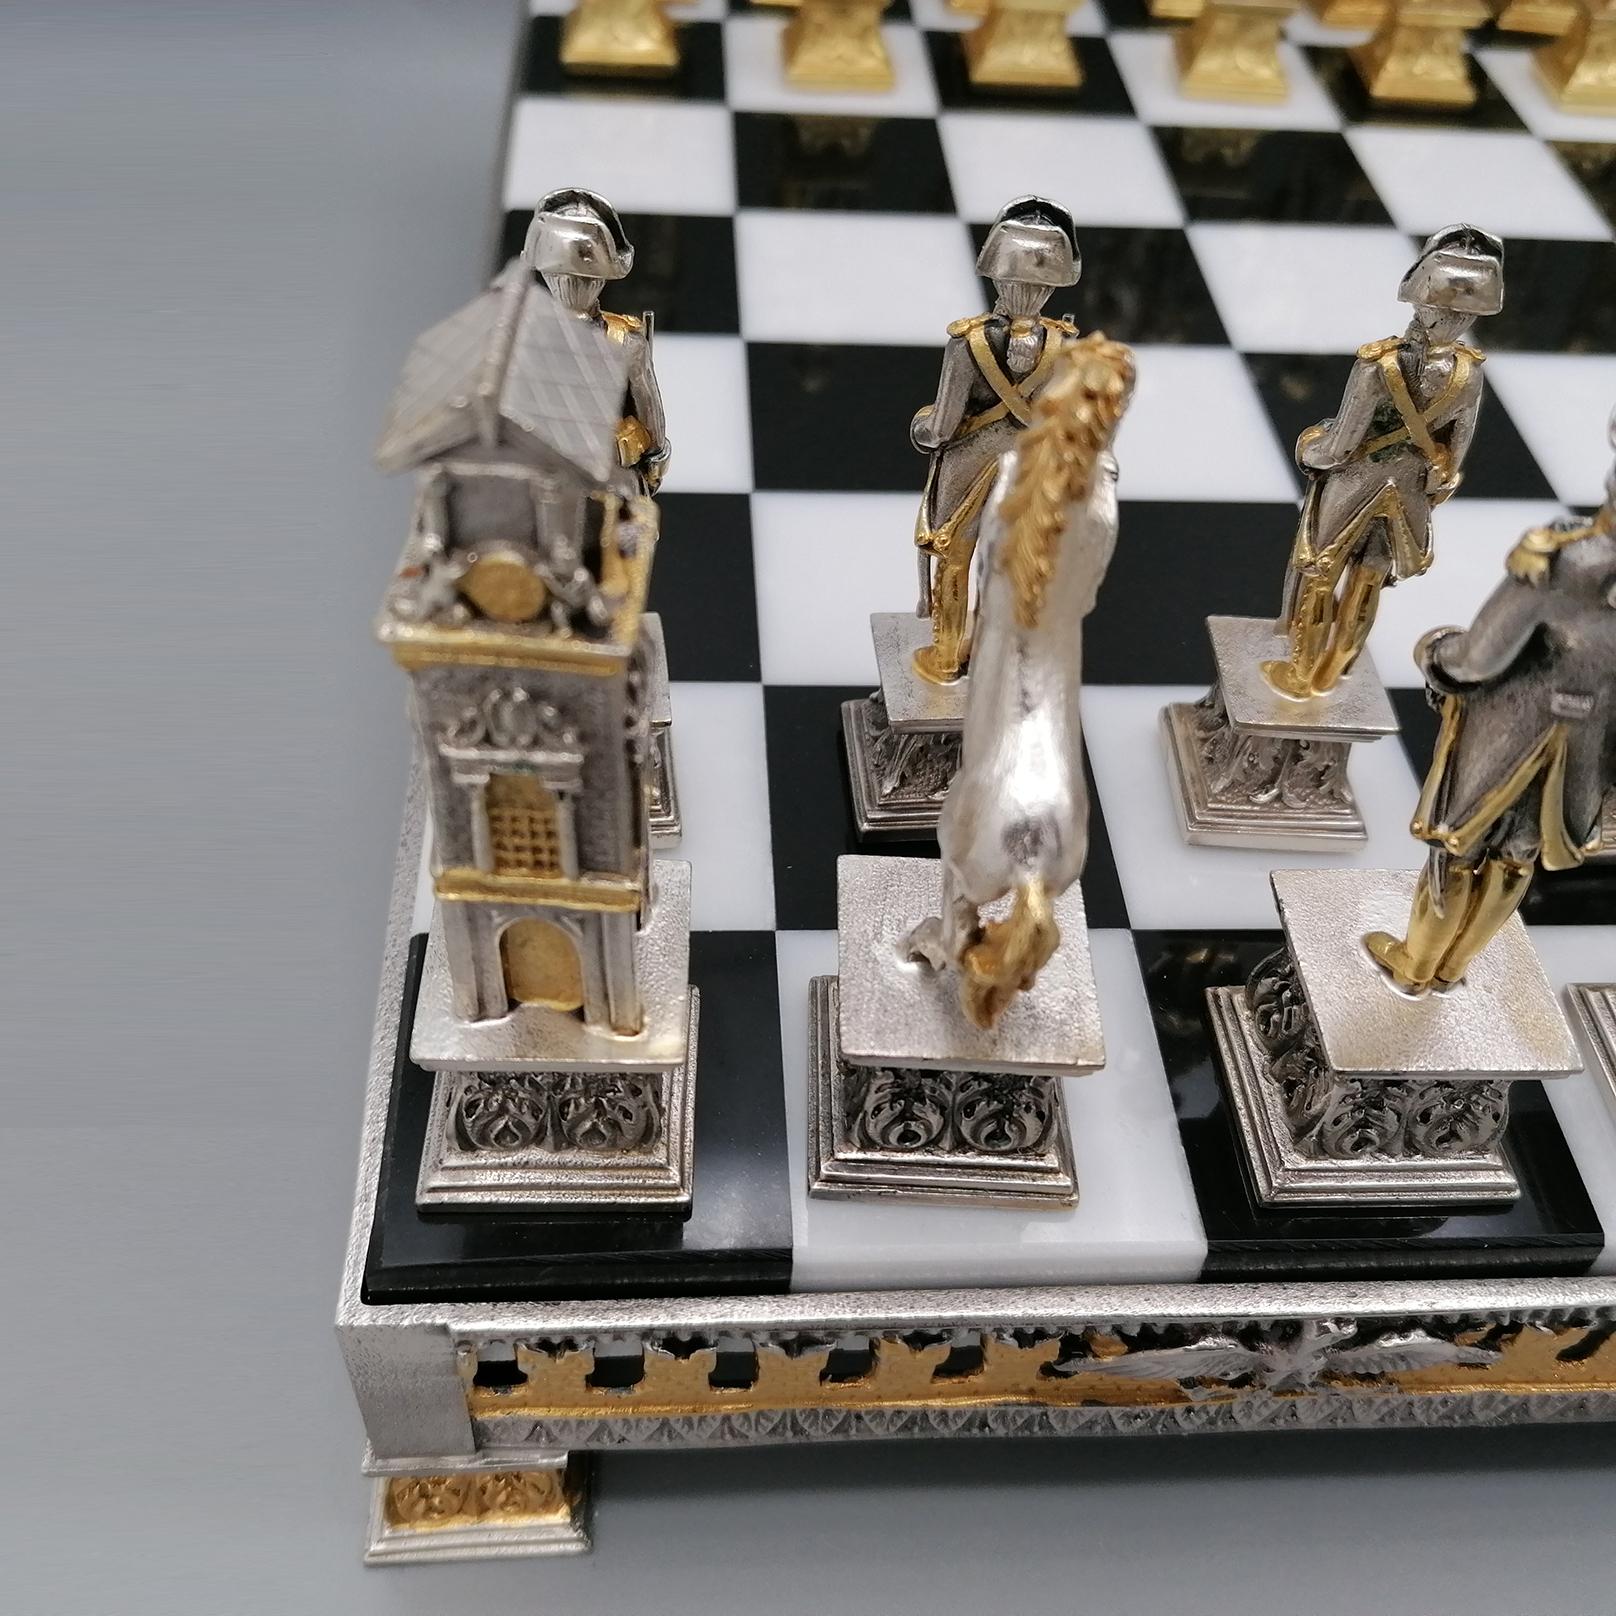 21st ceentury Italian Empire style brass chess board and game For Sale 5